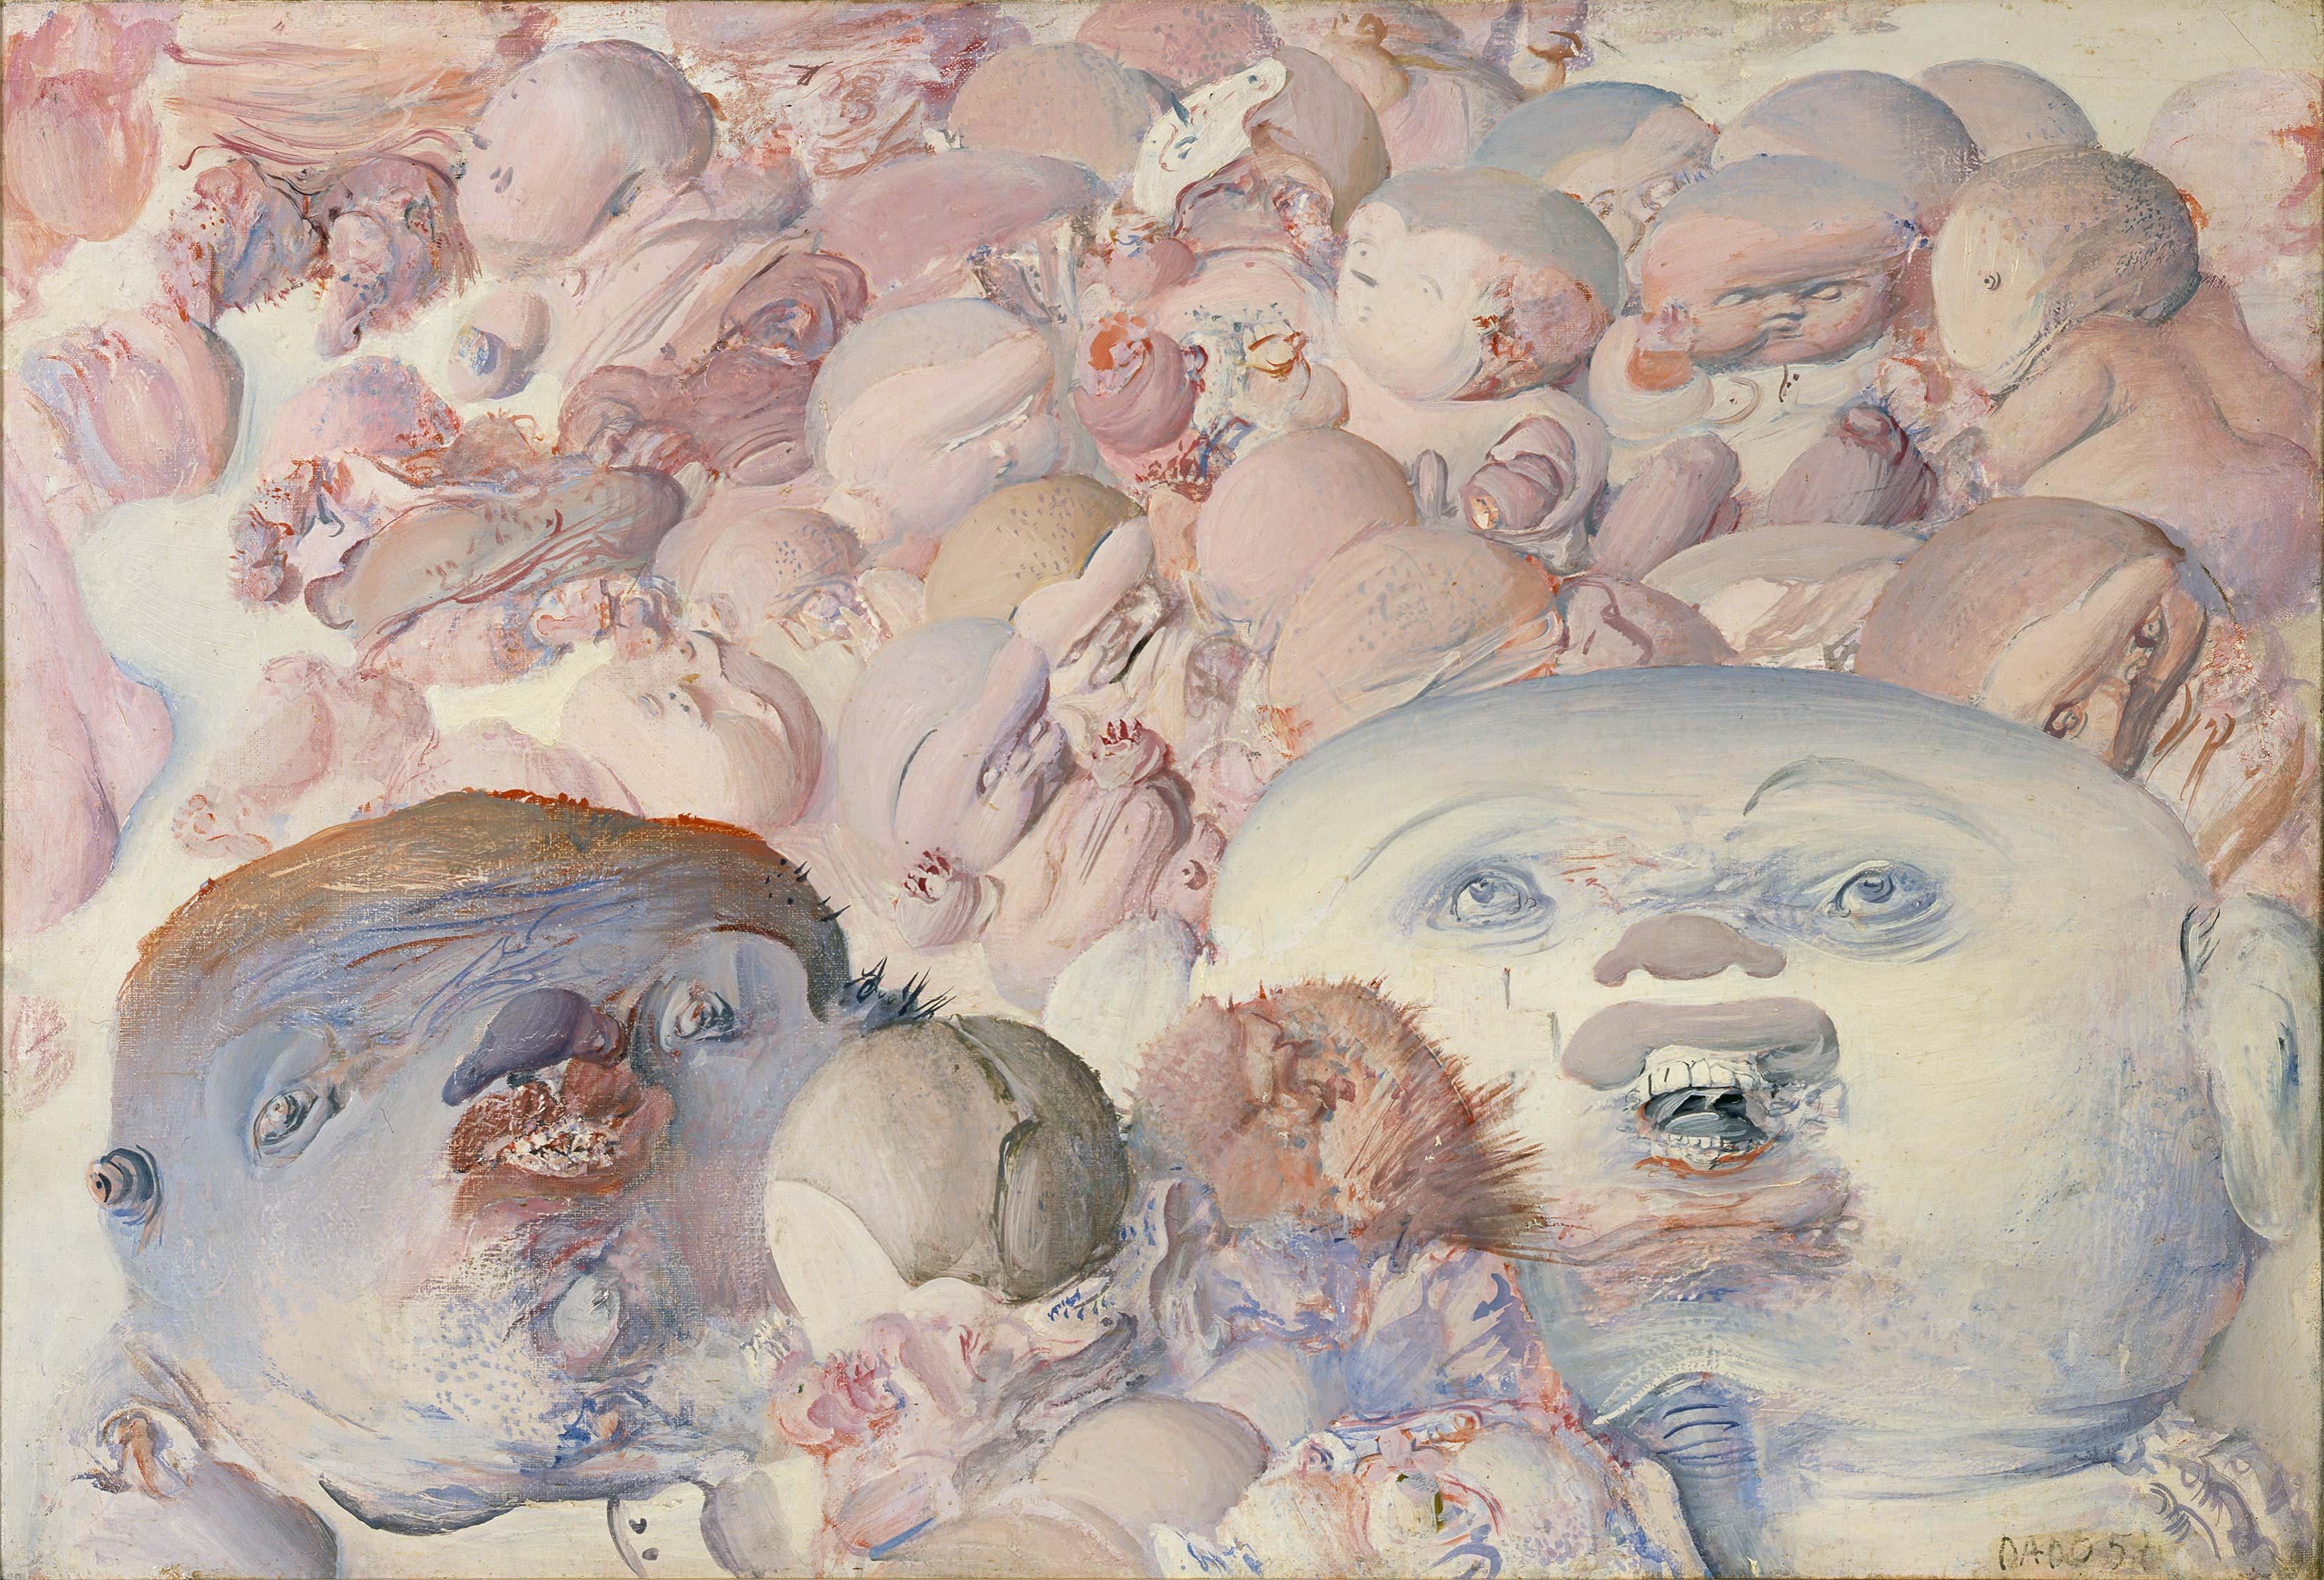 Dado’s painting: Untitled, 1957